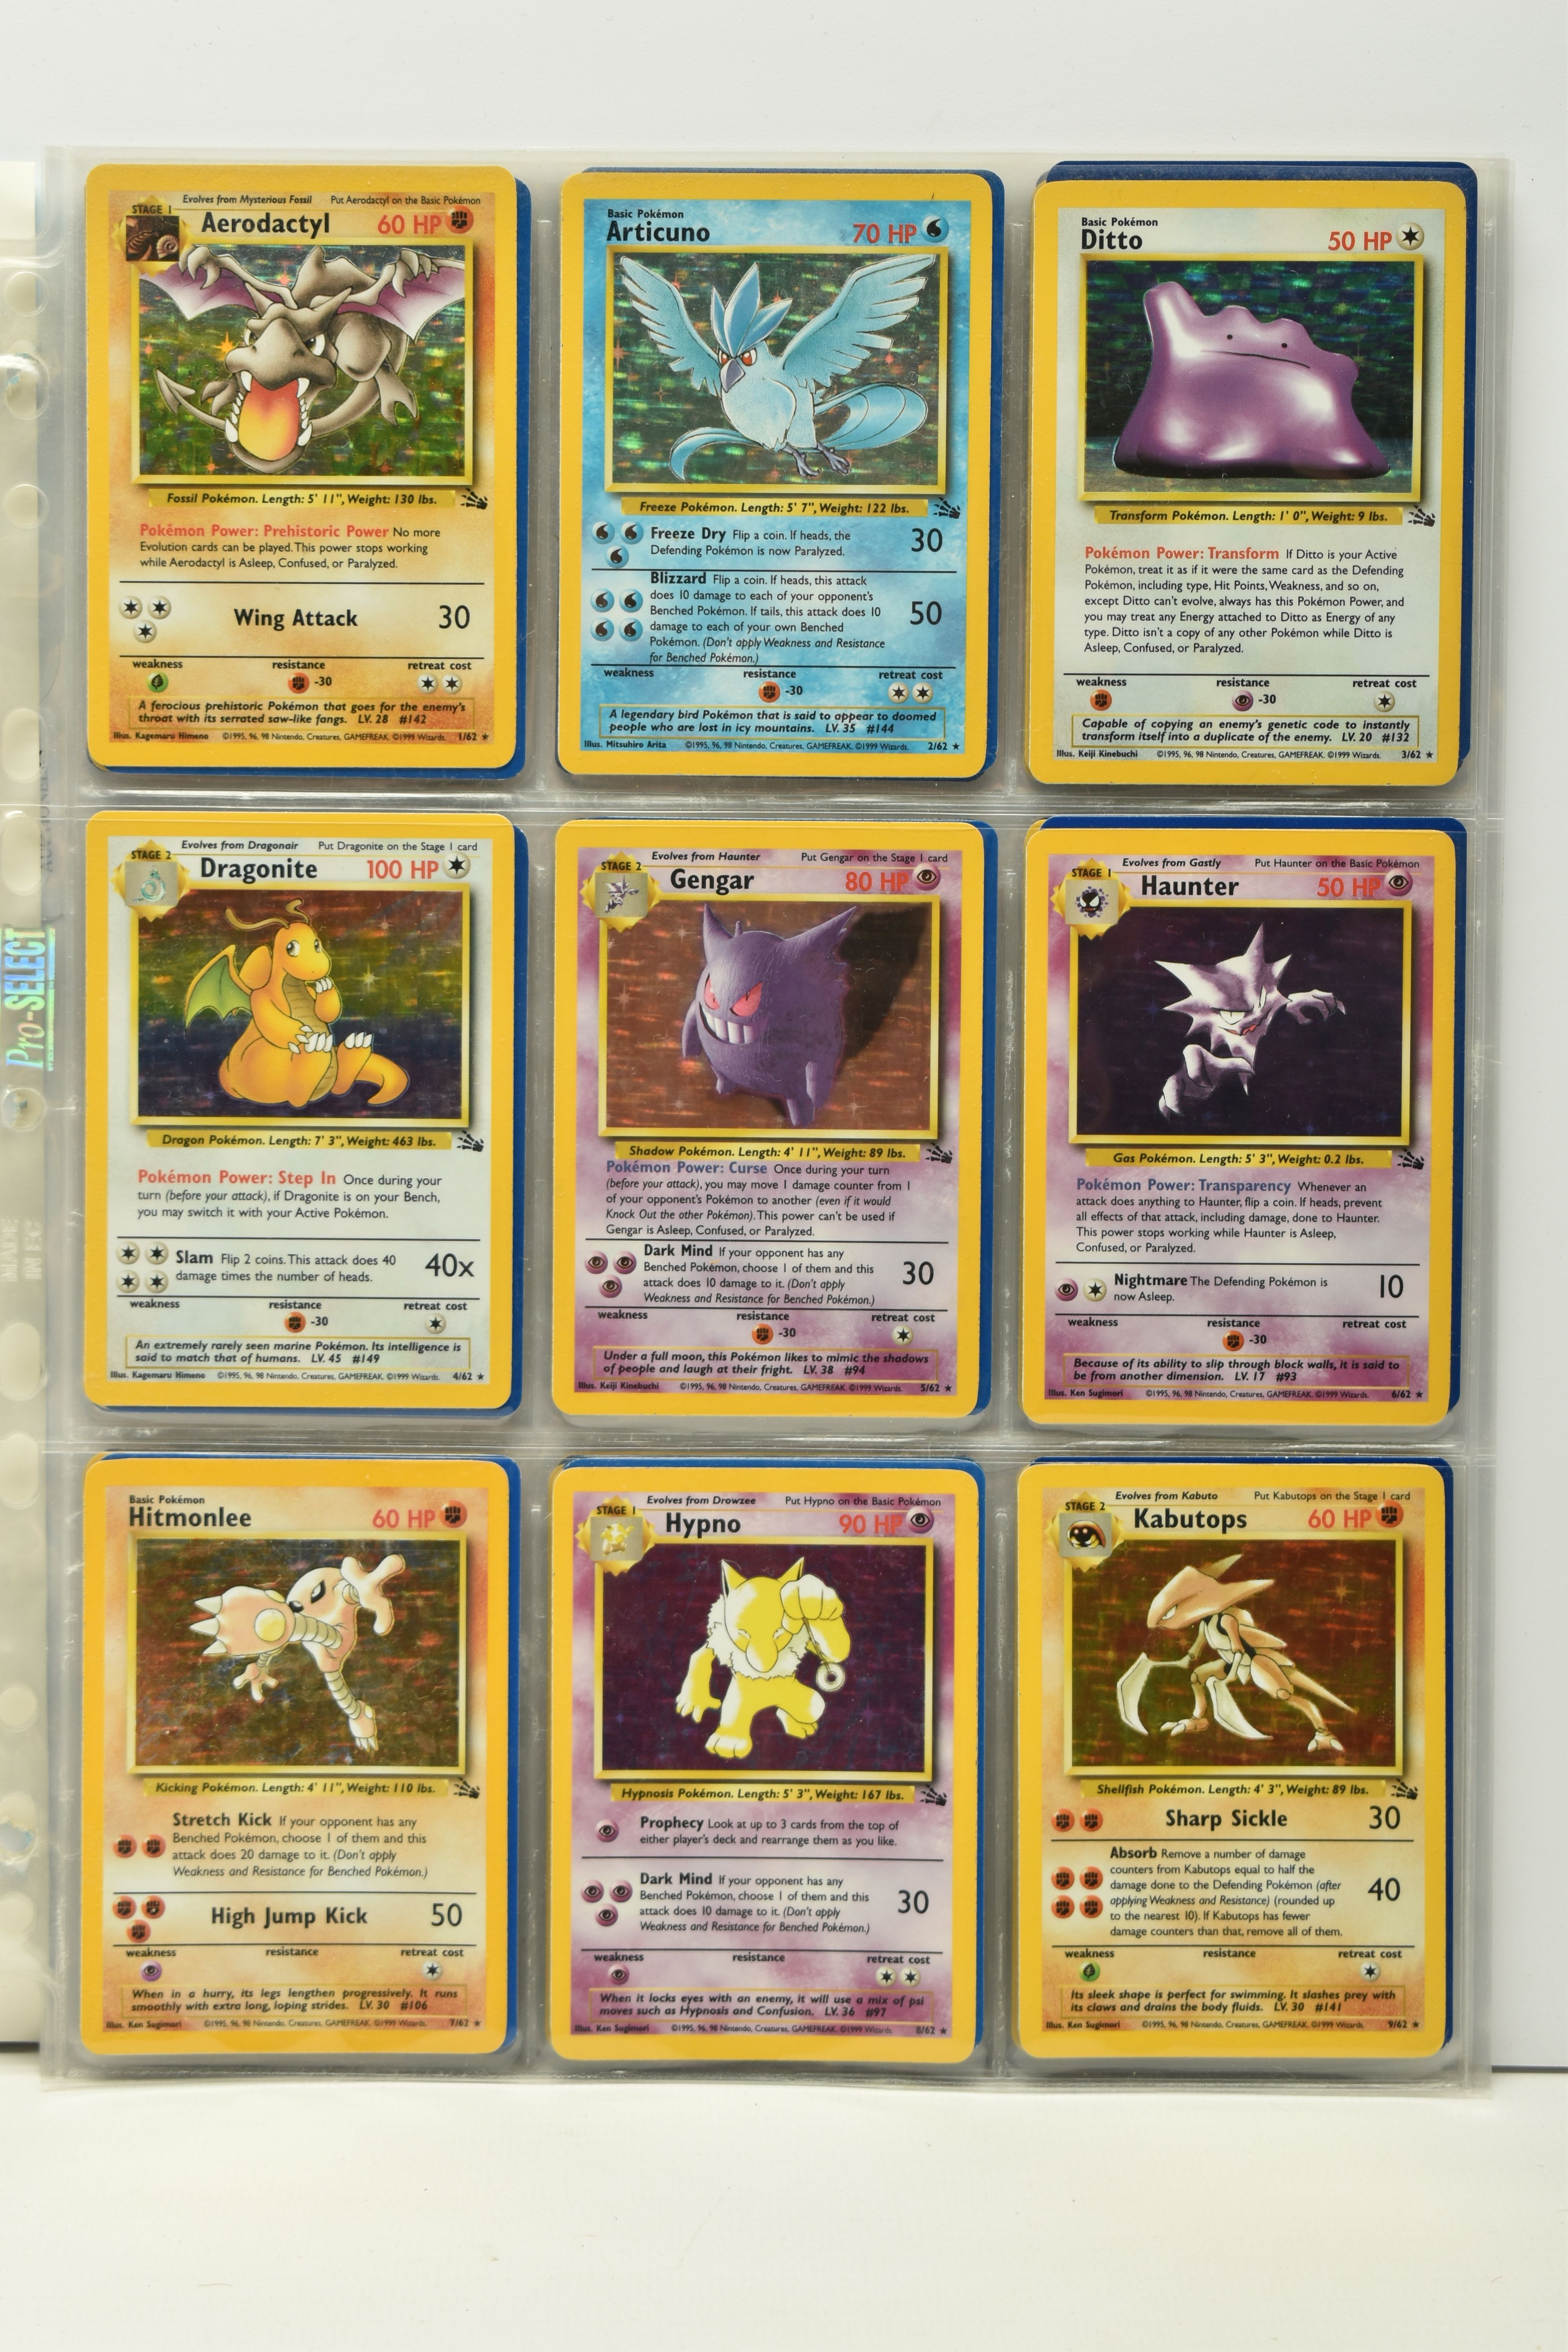 POKEMON COMPLETE FOSSIL SET, all 62 cards are present, no first editions are included, condition